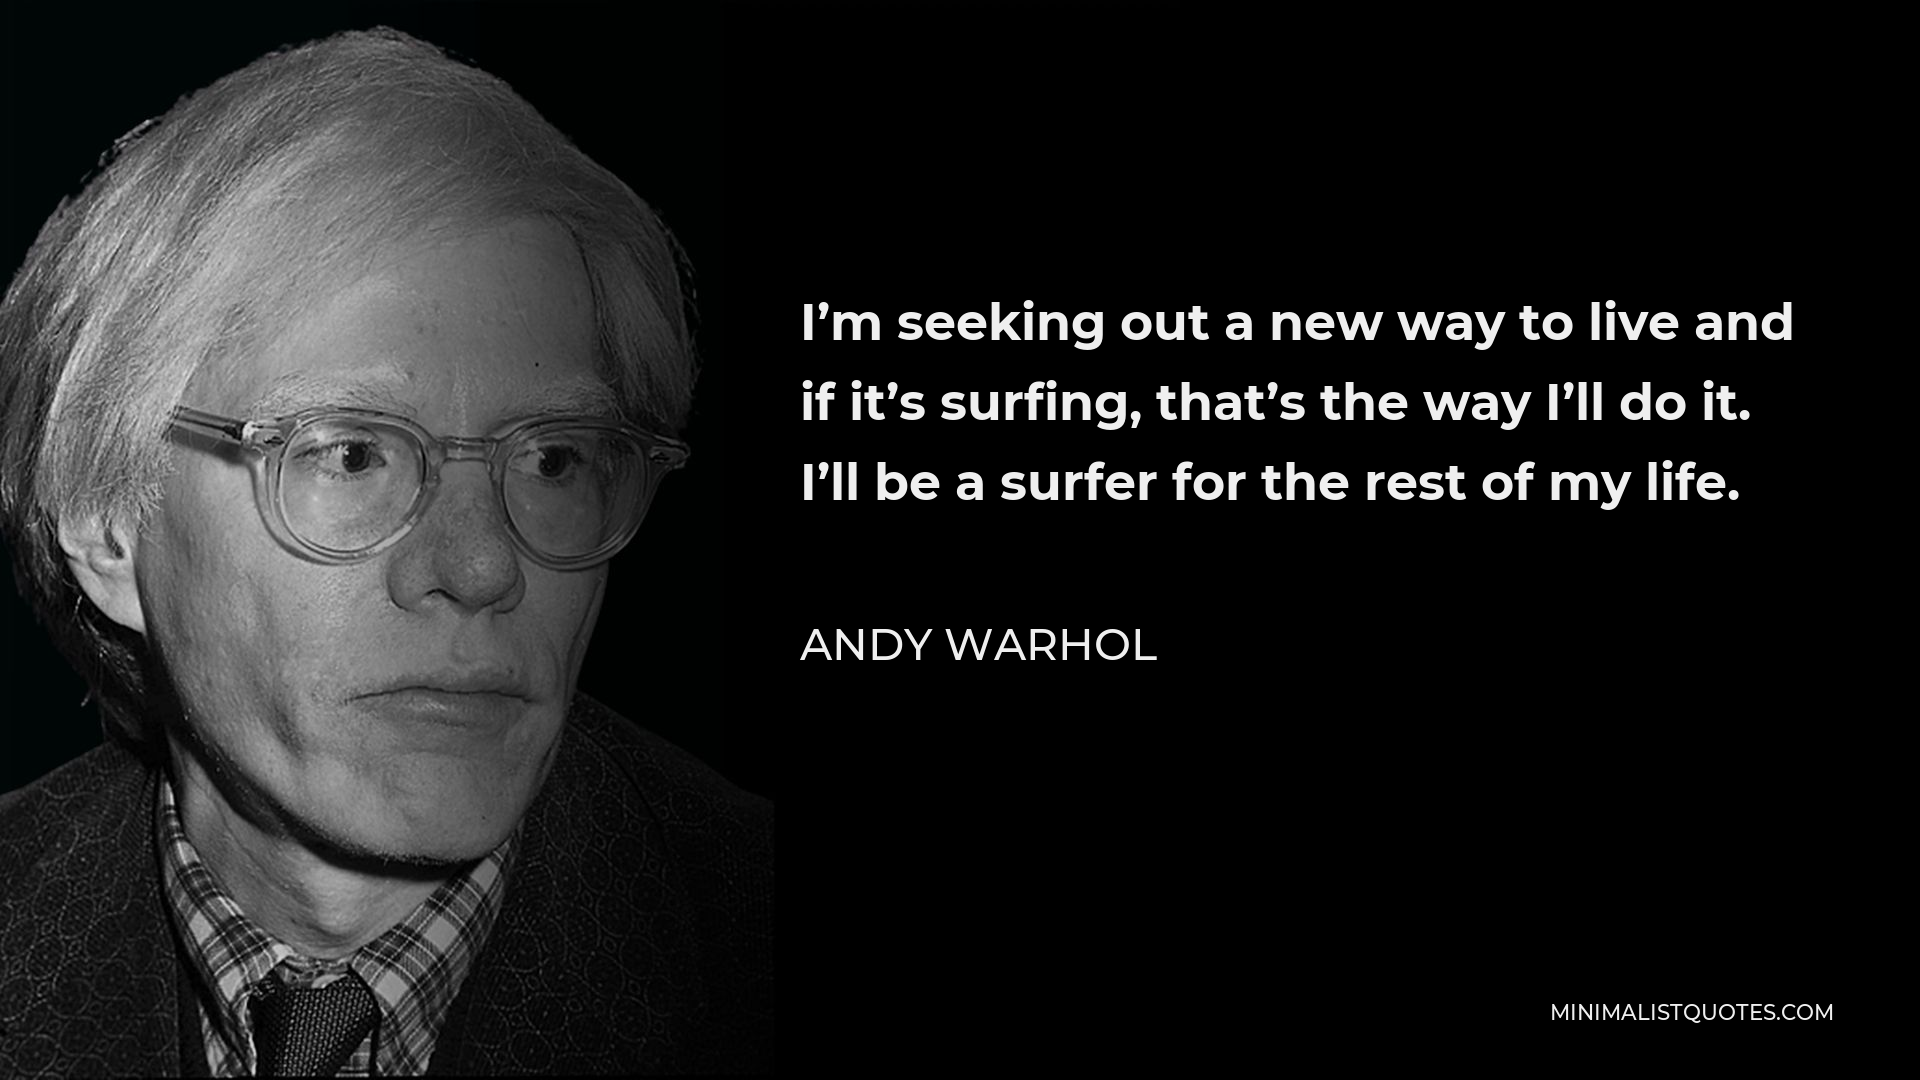 Andy Warhol Quote - I’m seeking out a new way to live and if it’s surfing, that’s the way I’ll do it. I’ll be a surfer for the rest of my life.